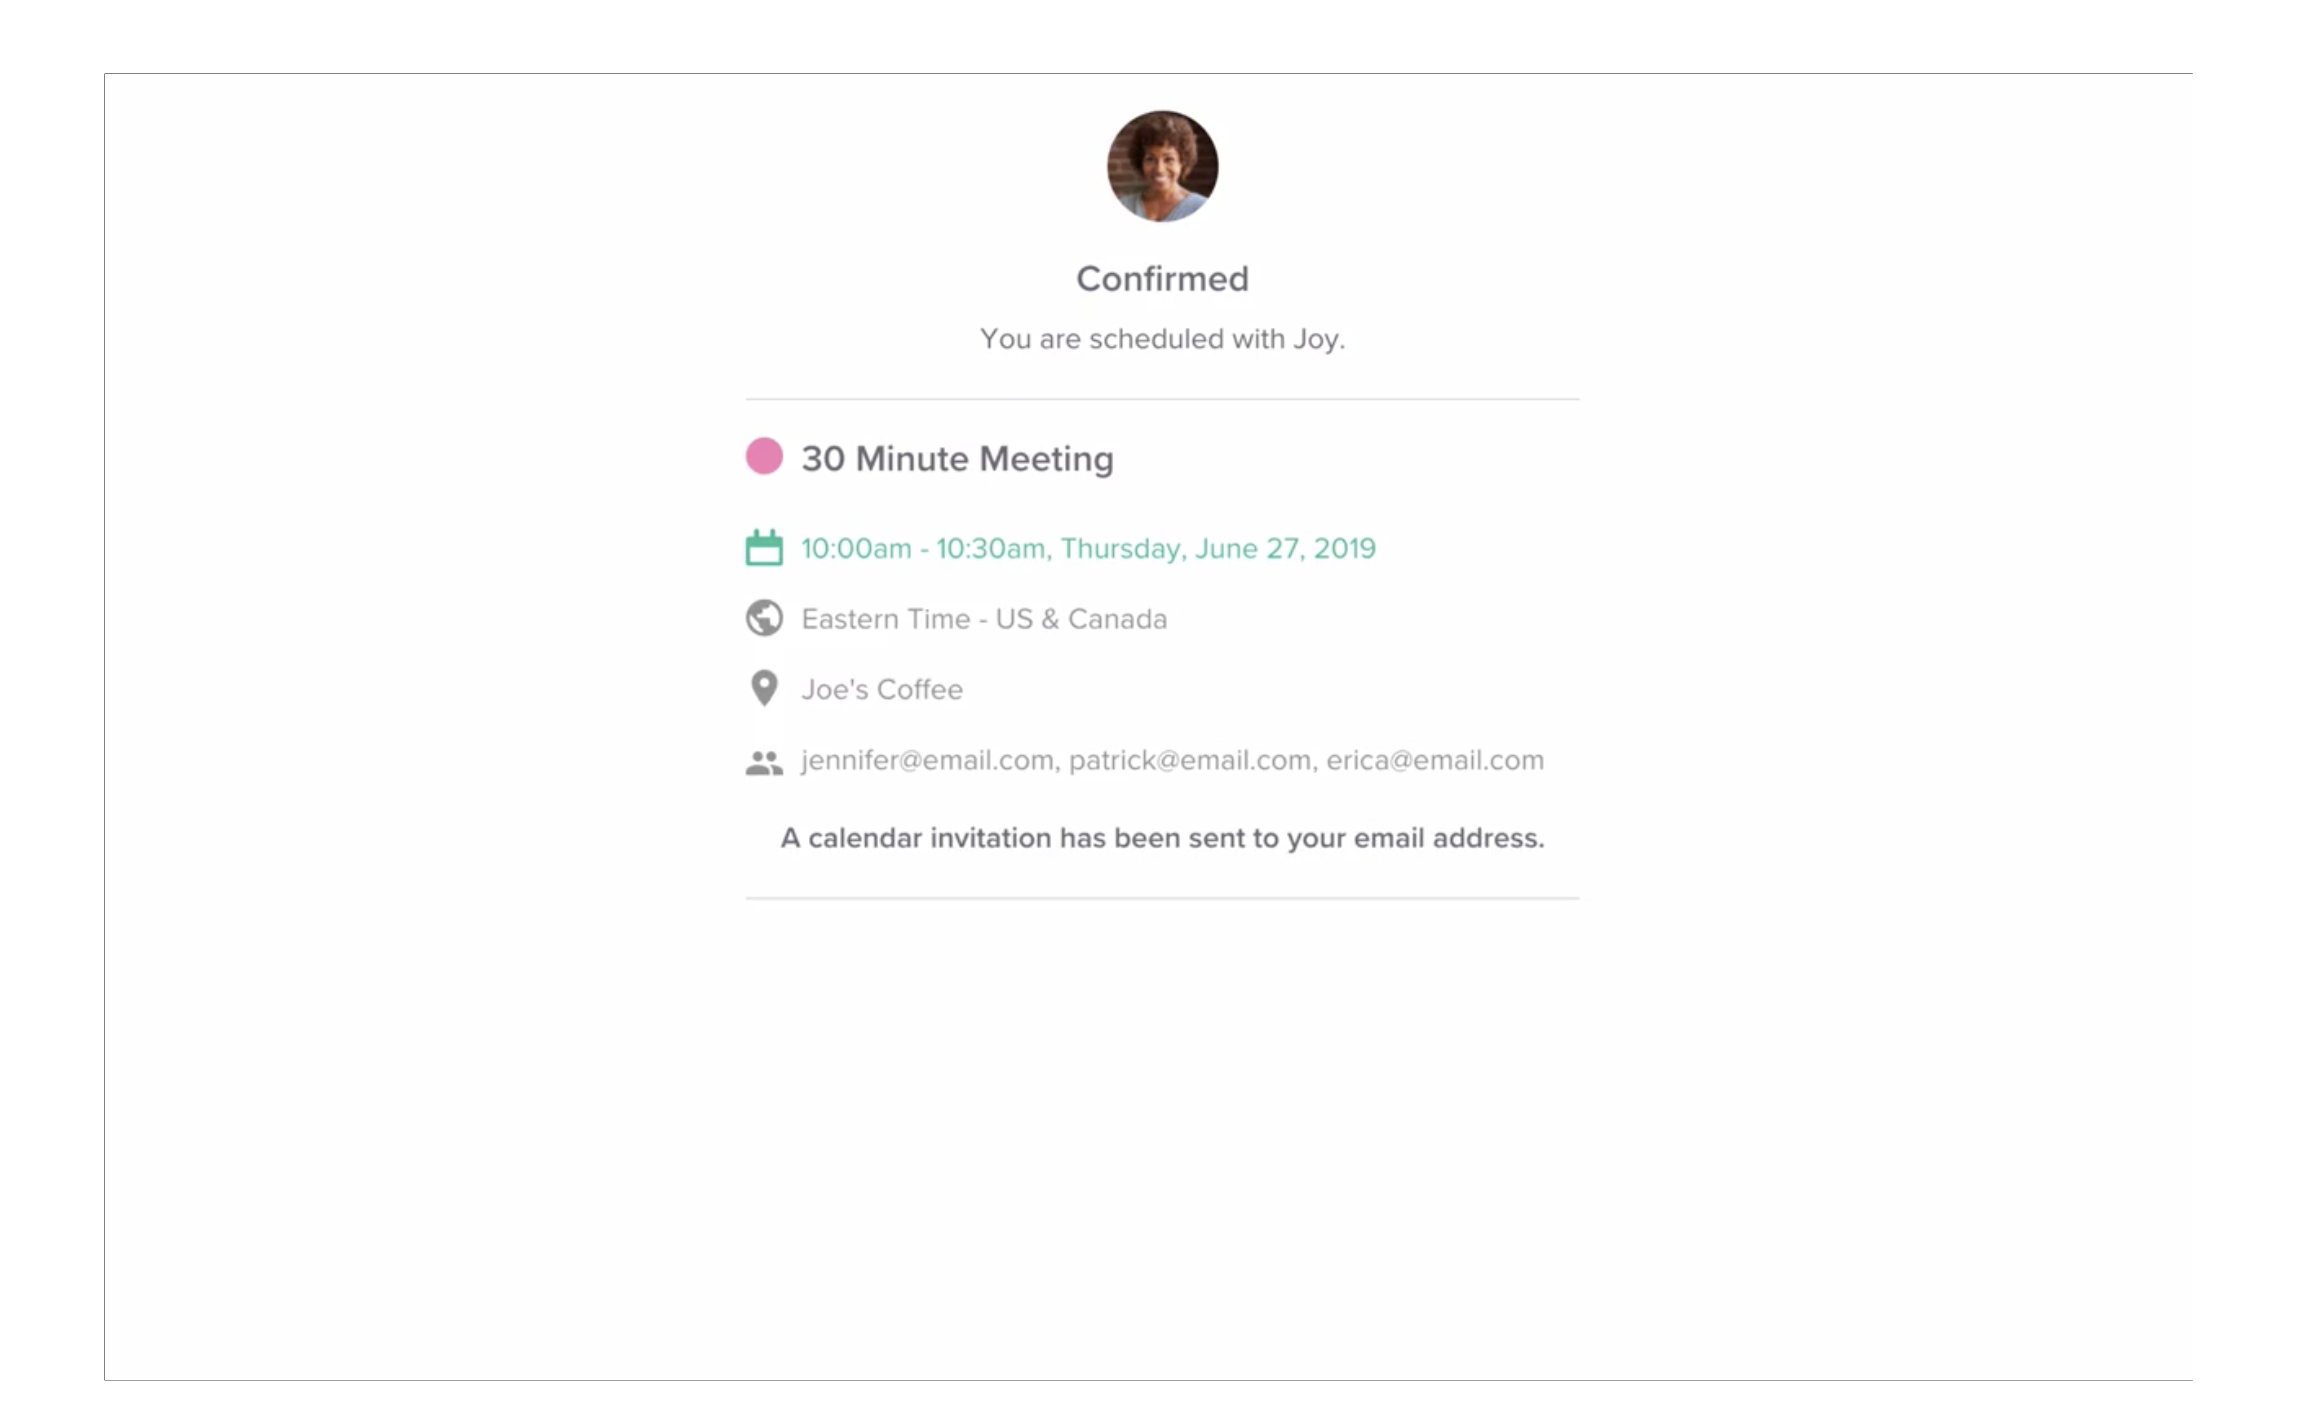 Confirmation screen for a meeting booked via Calendly